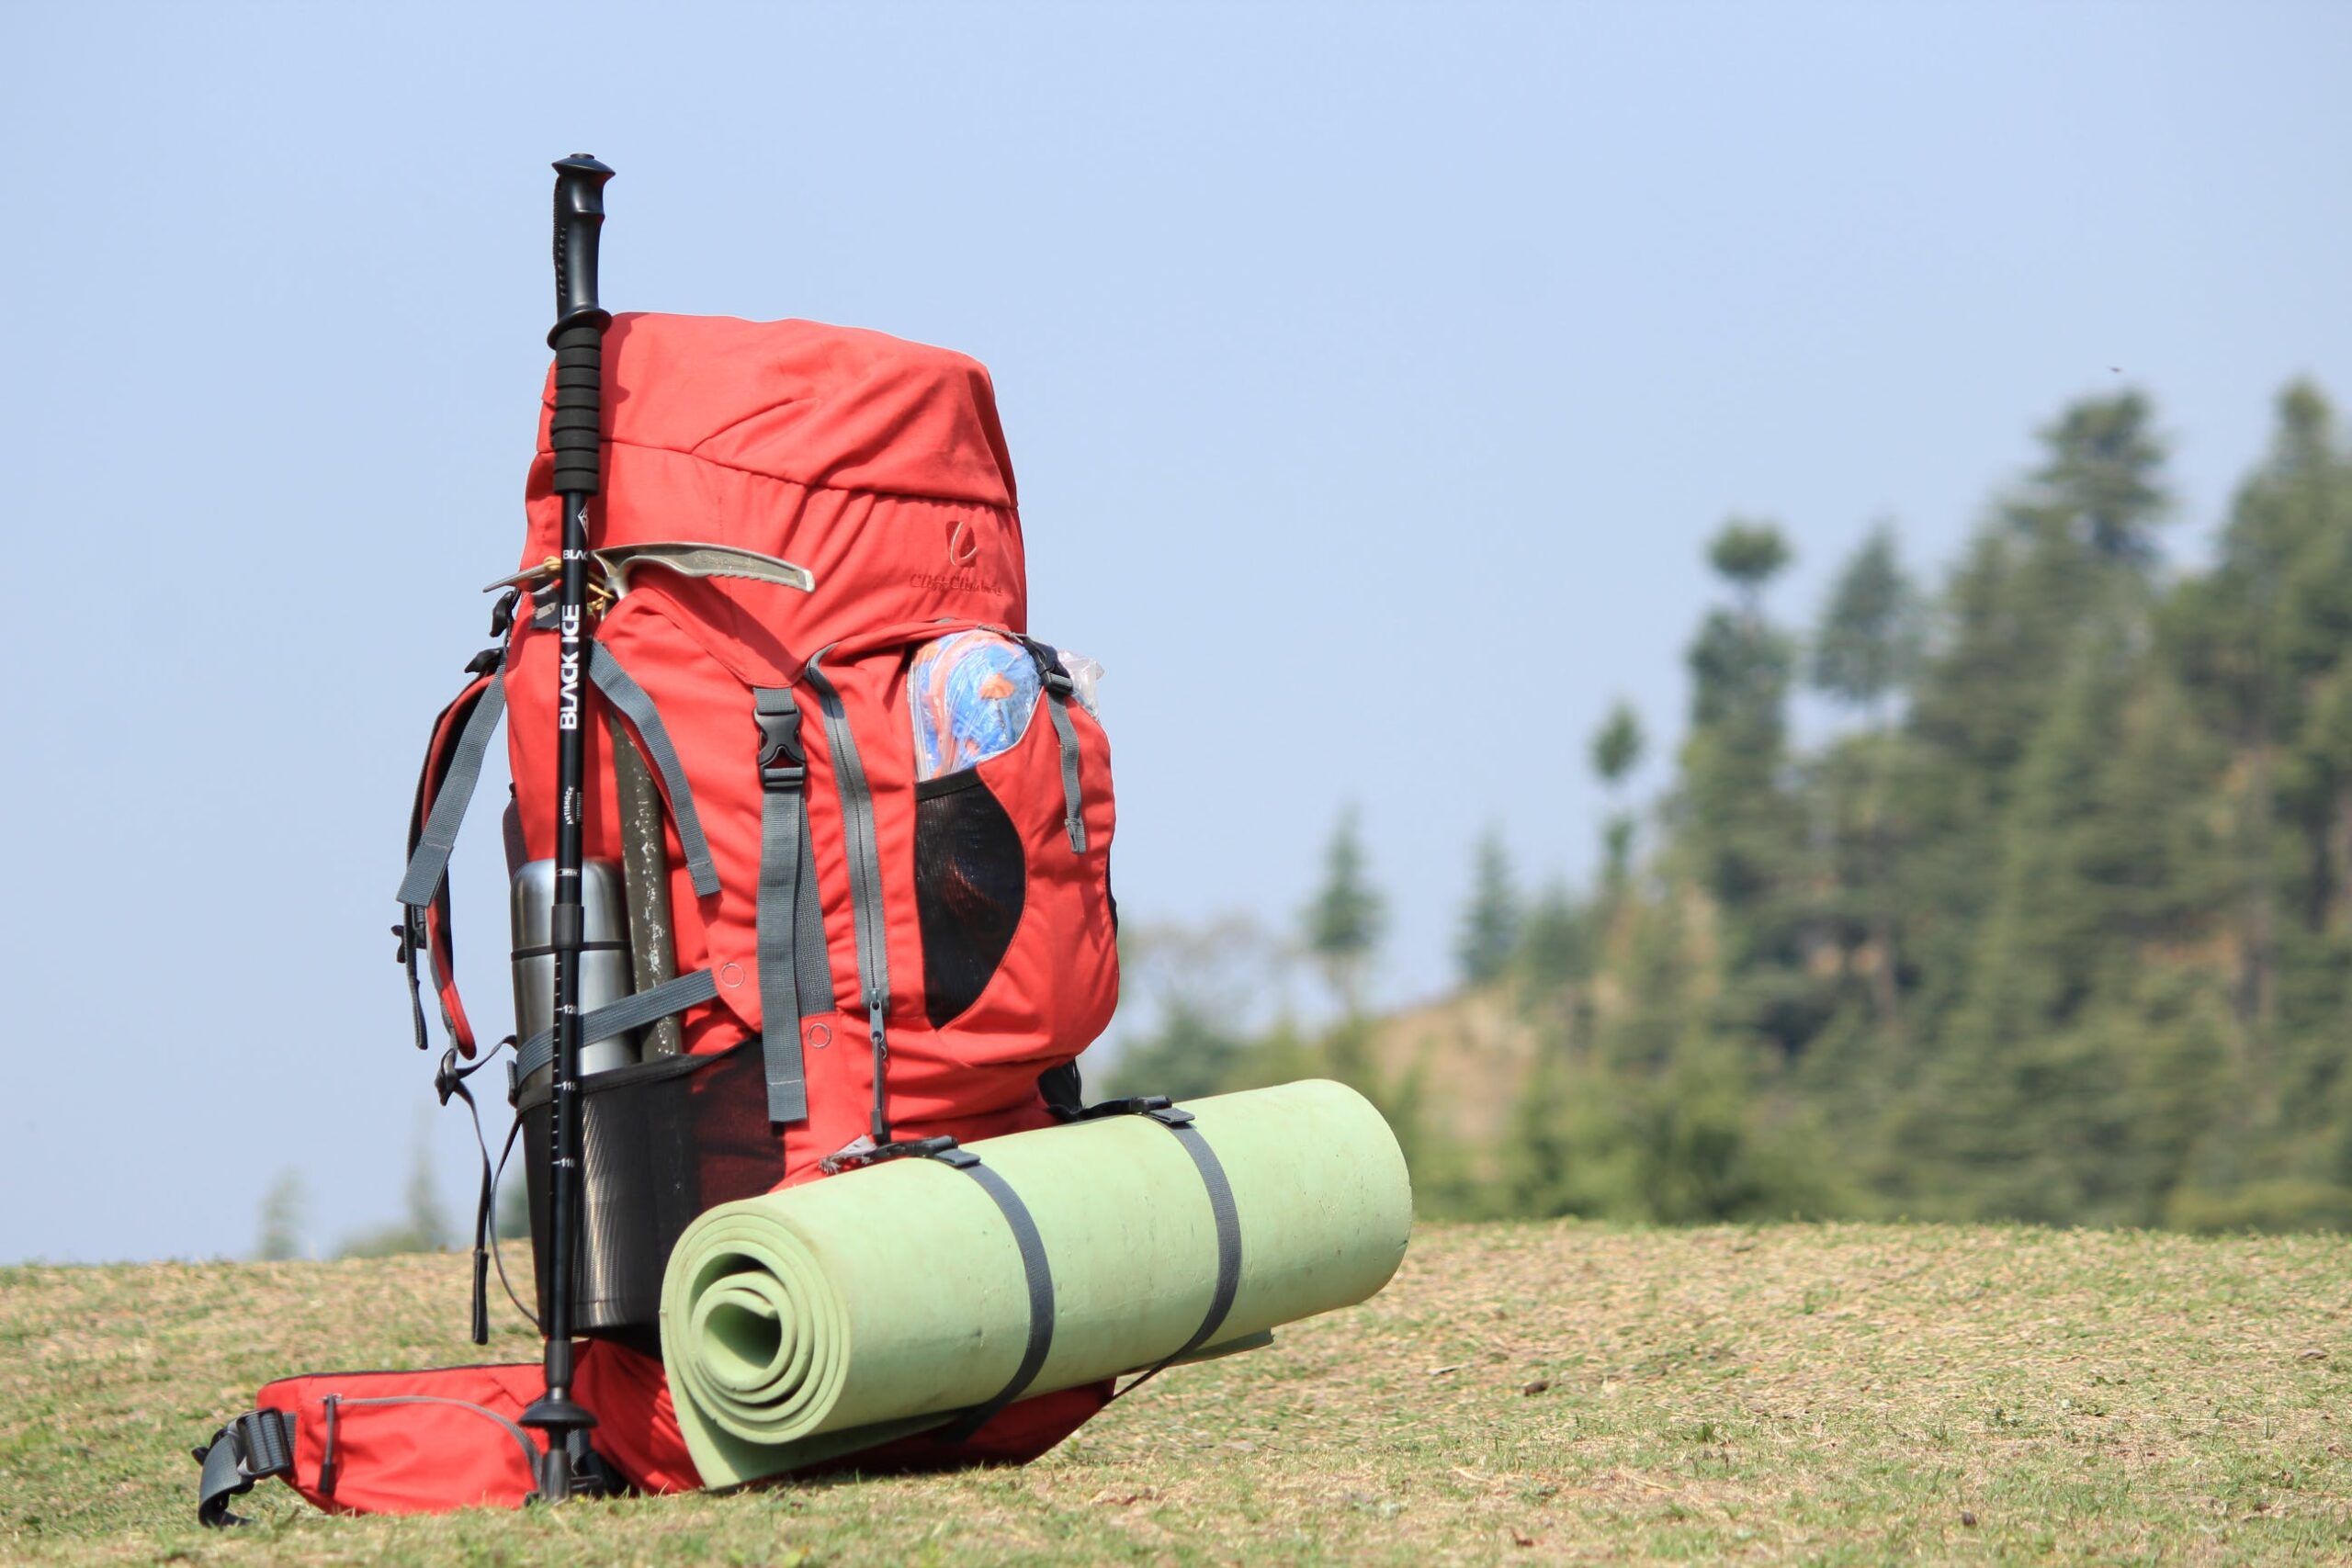 Precautions to take While Backpacking